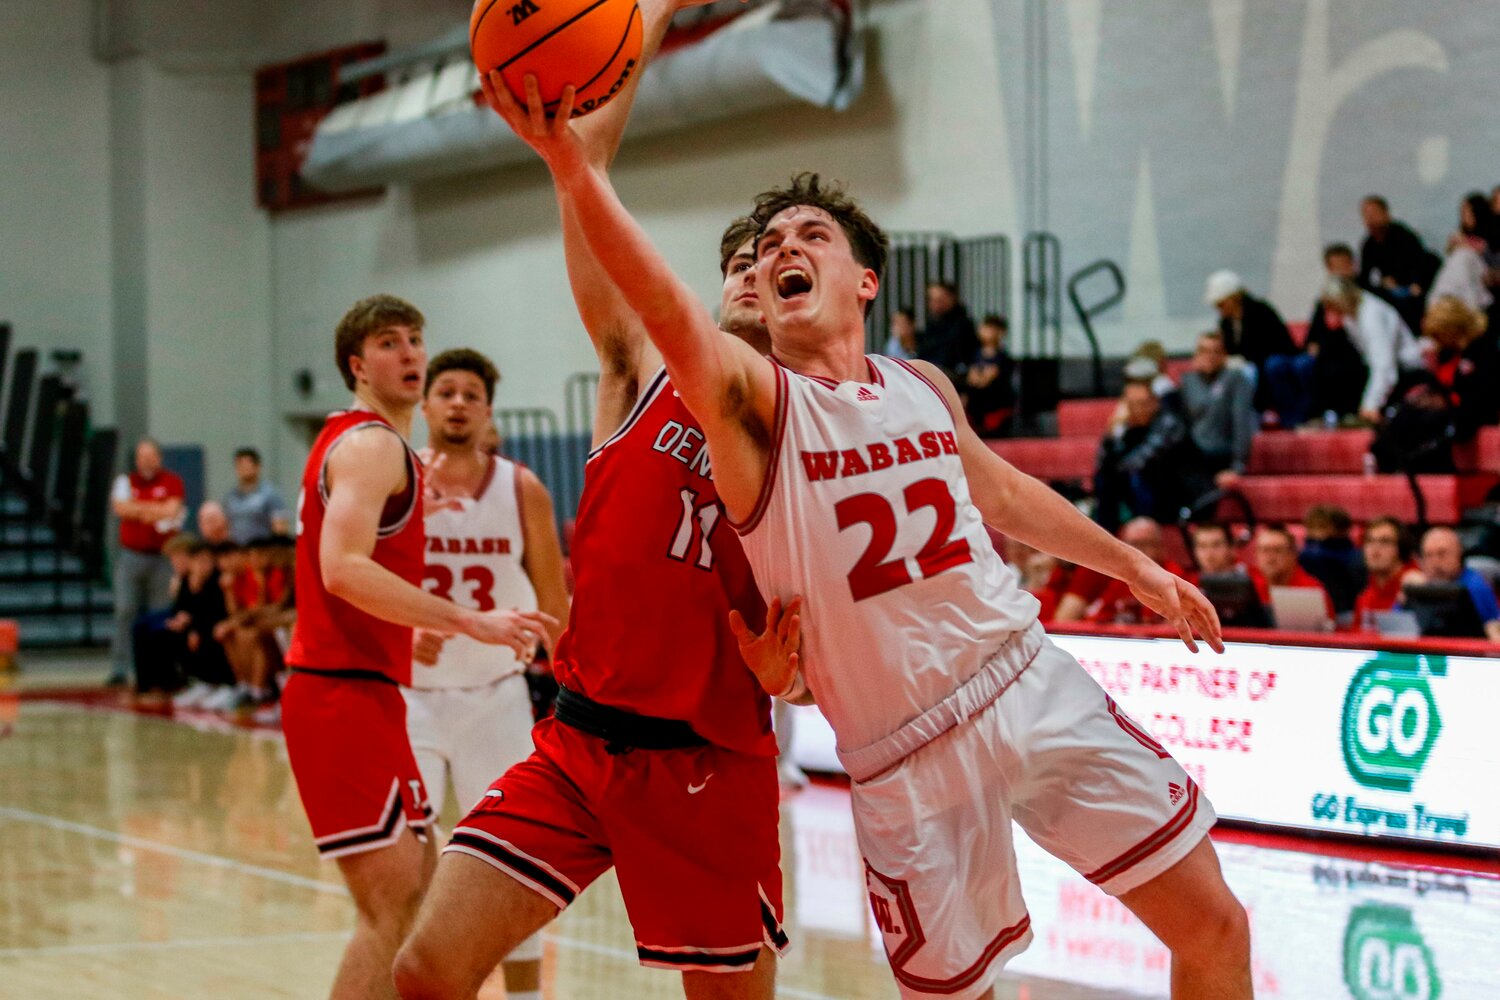 Avery Beaver scored a game-high 18 points but it wasn't enough as Wabash Men's Basketball dropped it's 5th straight game 73-65 to Denison on Wednesday night.